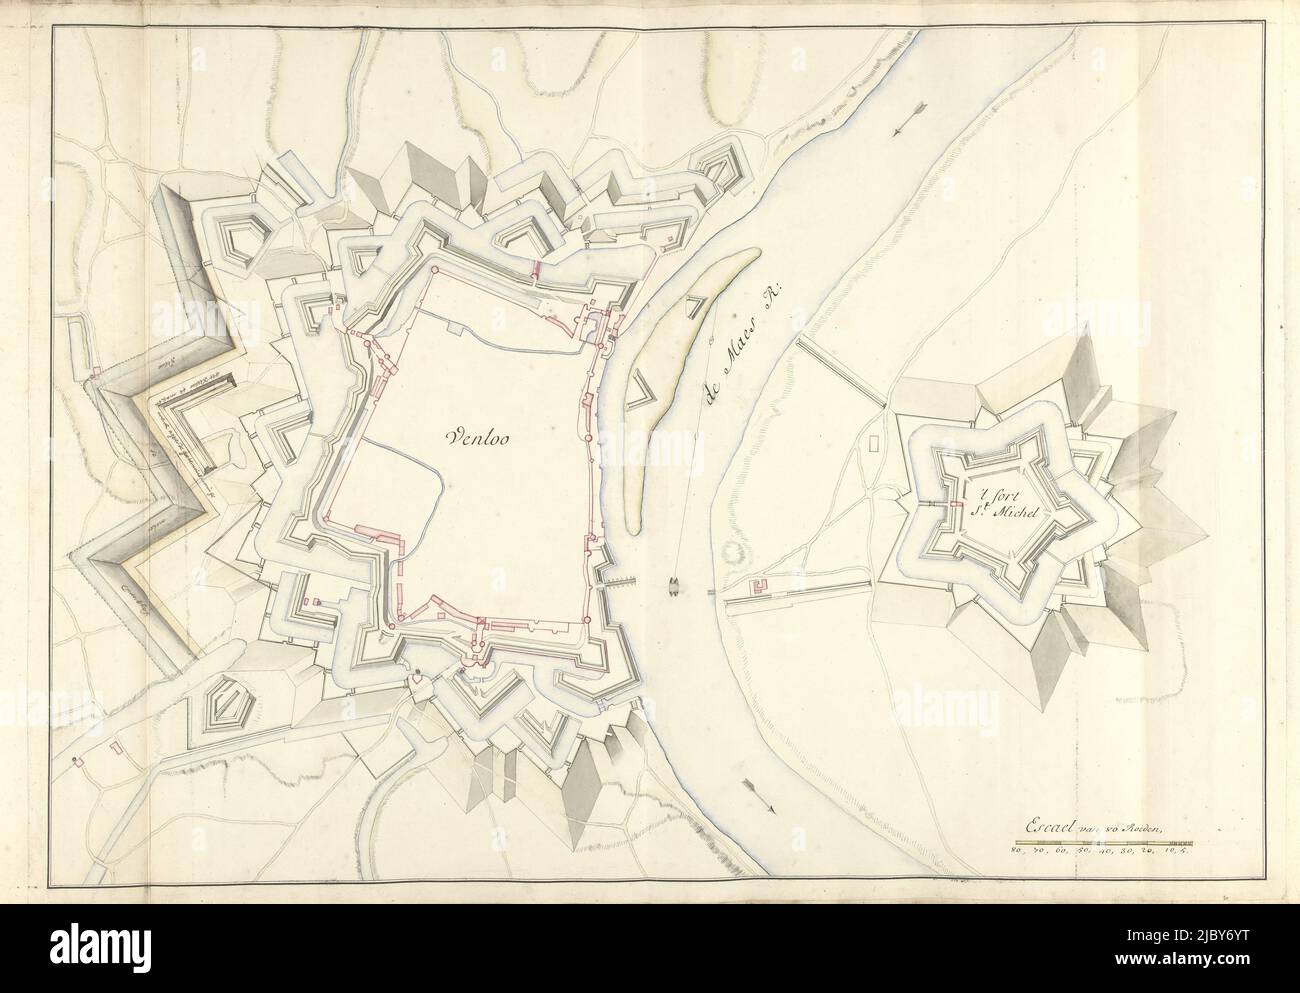 Map of Venlo, ca. 1701-1715, Samuel Du Ry de Champdoré, 1701 - 1715, Map of the fortifications around the city of Venlo with the Fort Sint-Michiel, ca. 1701-1715. Part of a collection of drawn plans of fortified places in the Netherlands and surrounding countries at the time of the War of the Spanish Succession (part B)., draughtsman: Samuel Du Ry de Champdoré, Netherlands, 1701 - 1715, paper, h 527 mm × w 730 mm Stock Photo